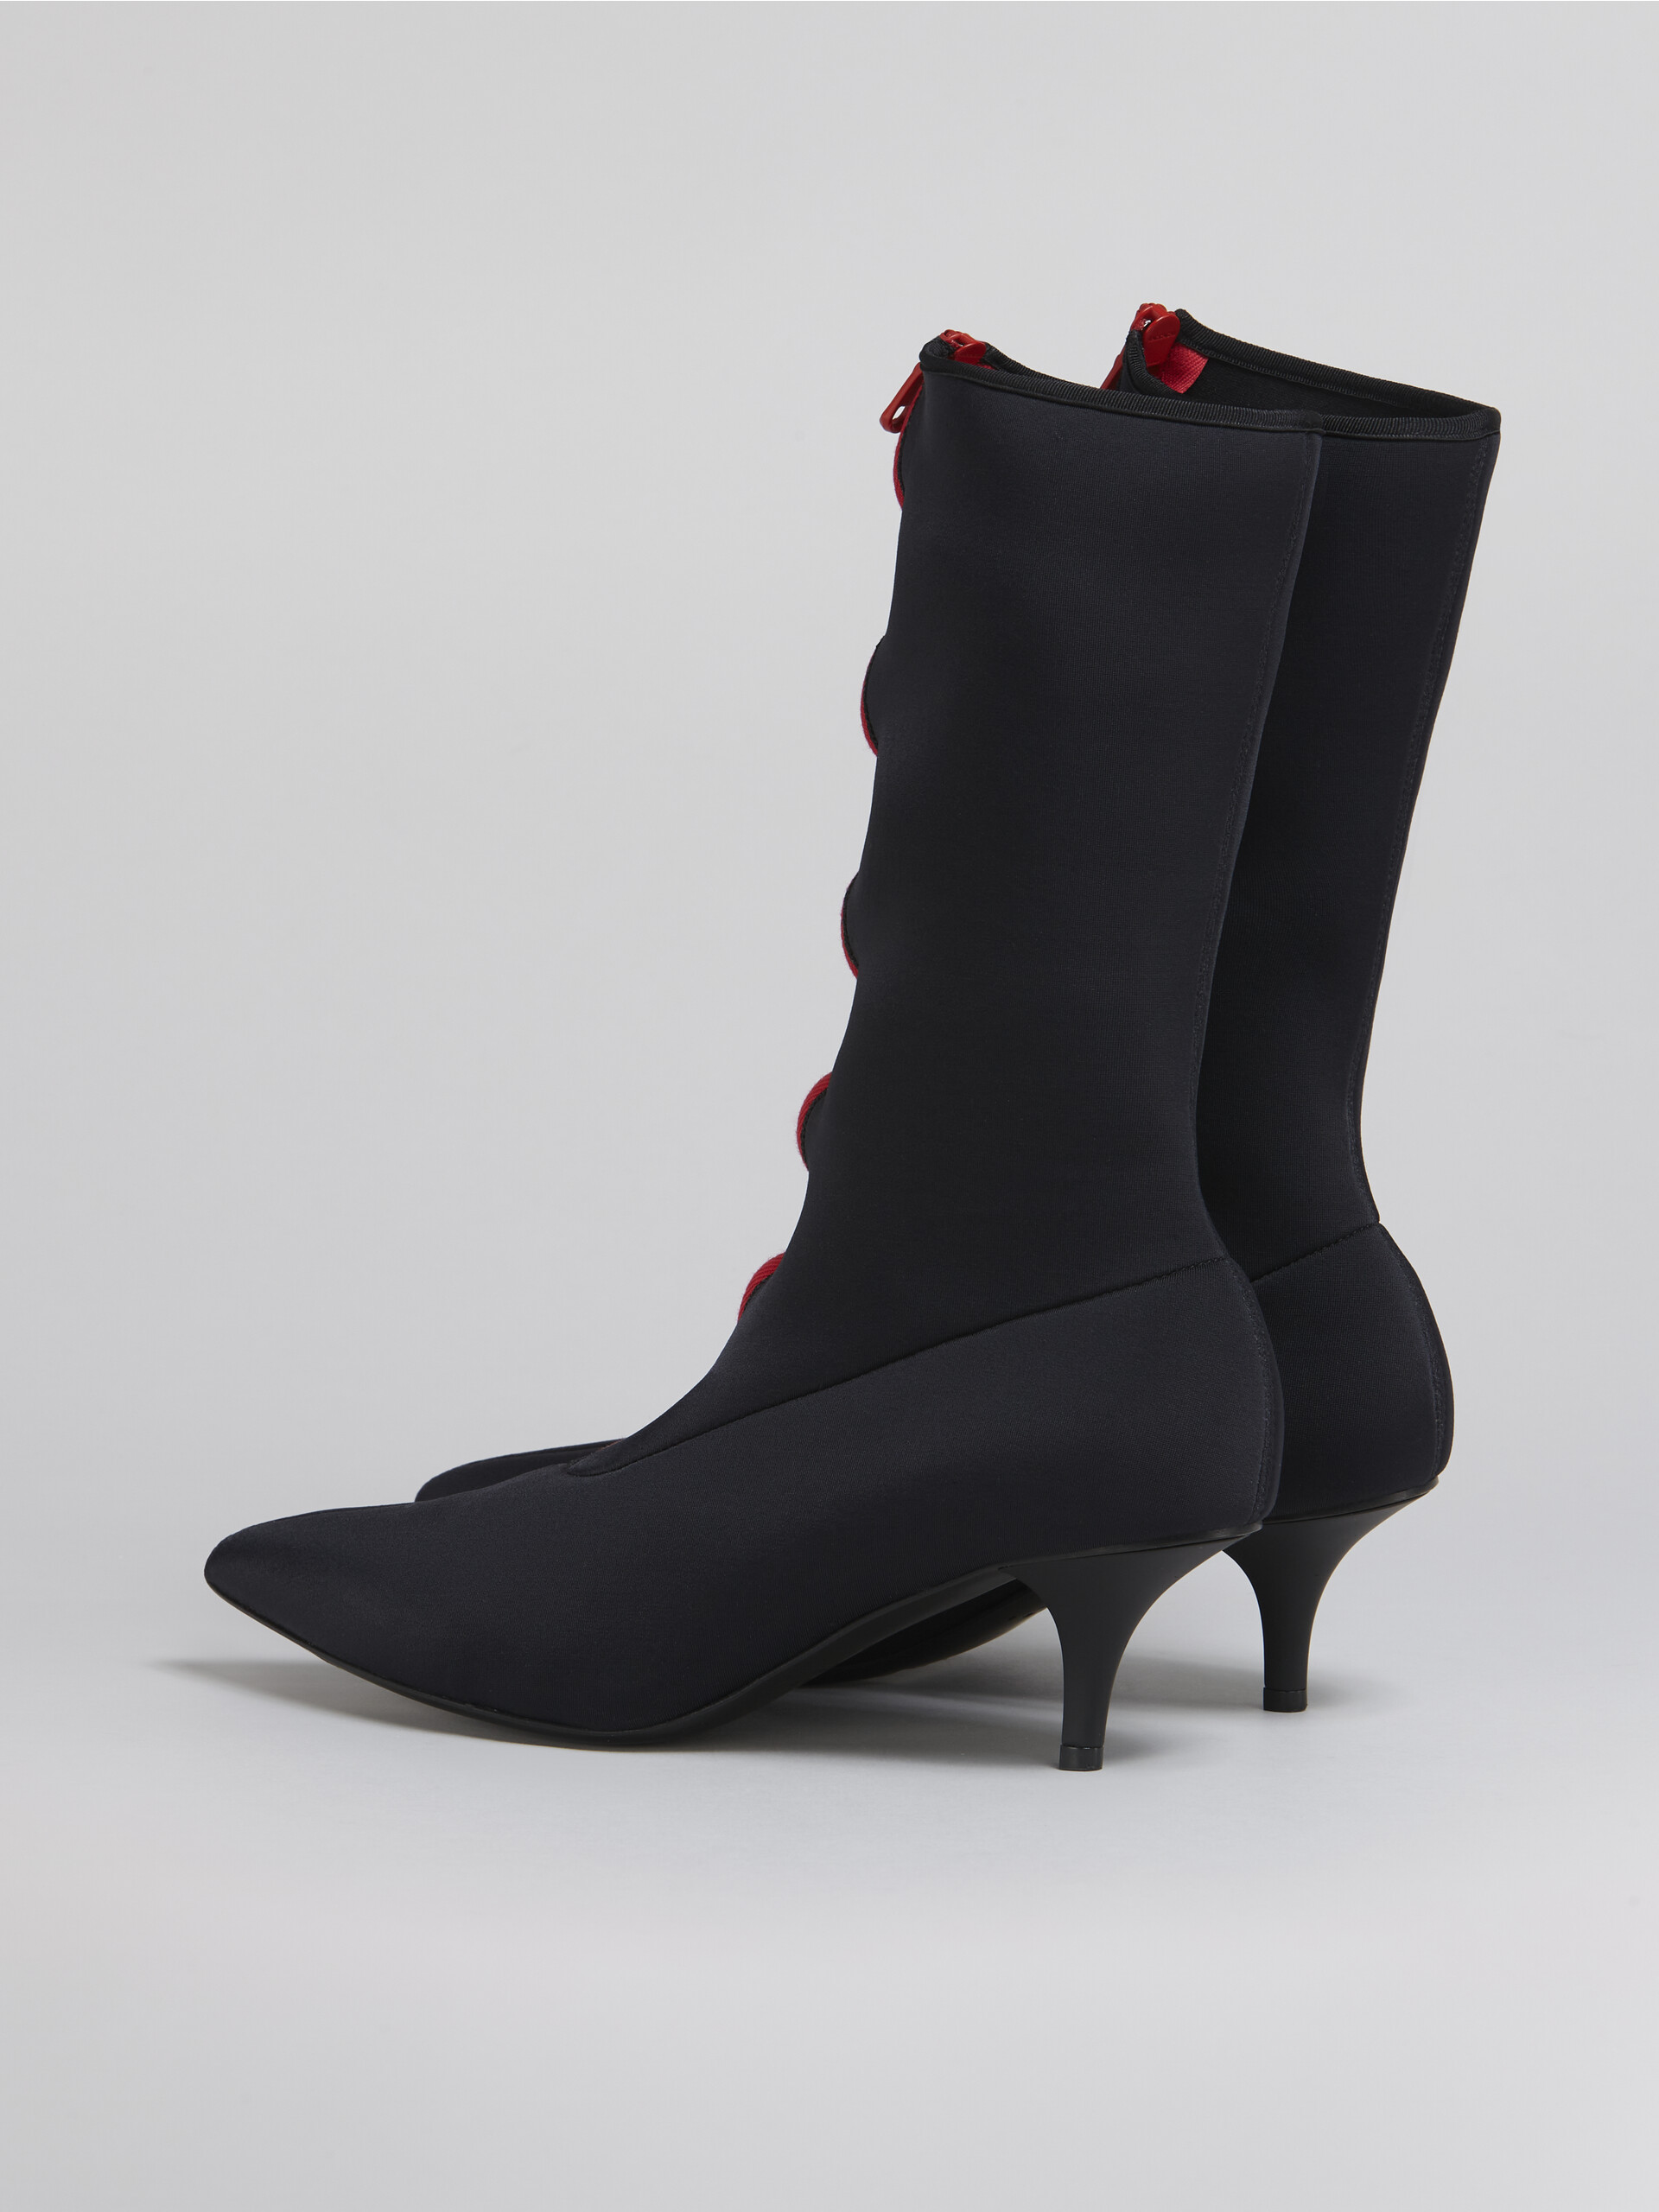 Pointed bootie in stretch neoprene - Boots - Image 3